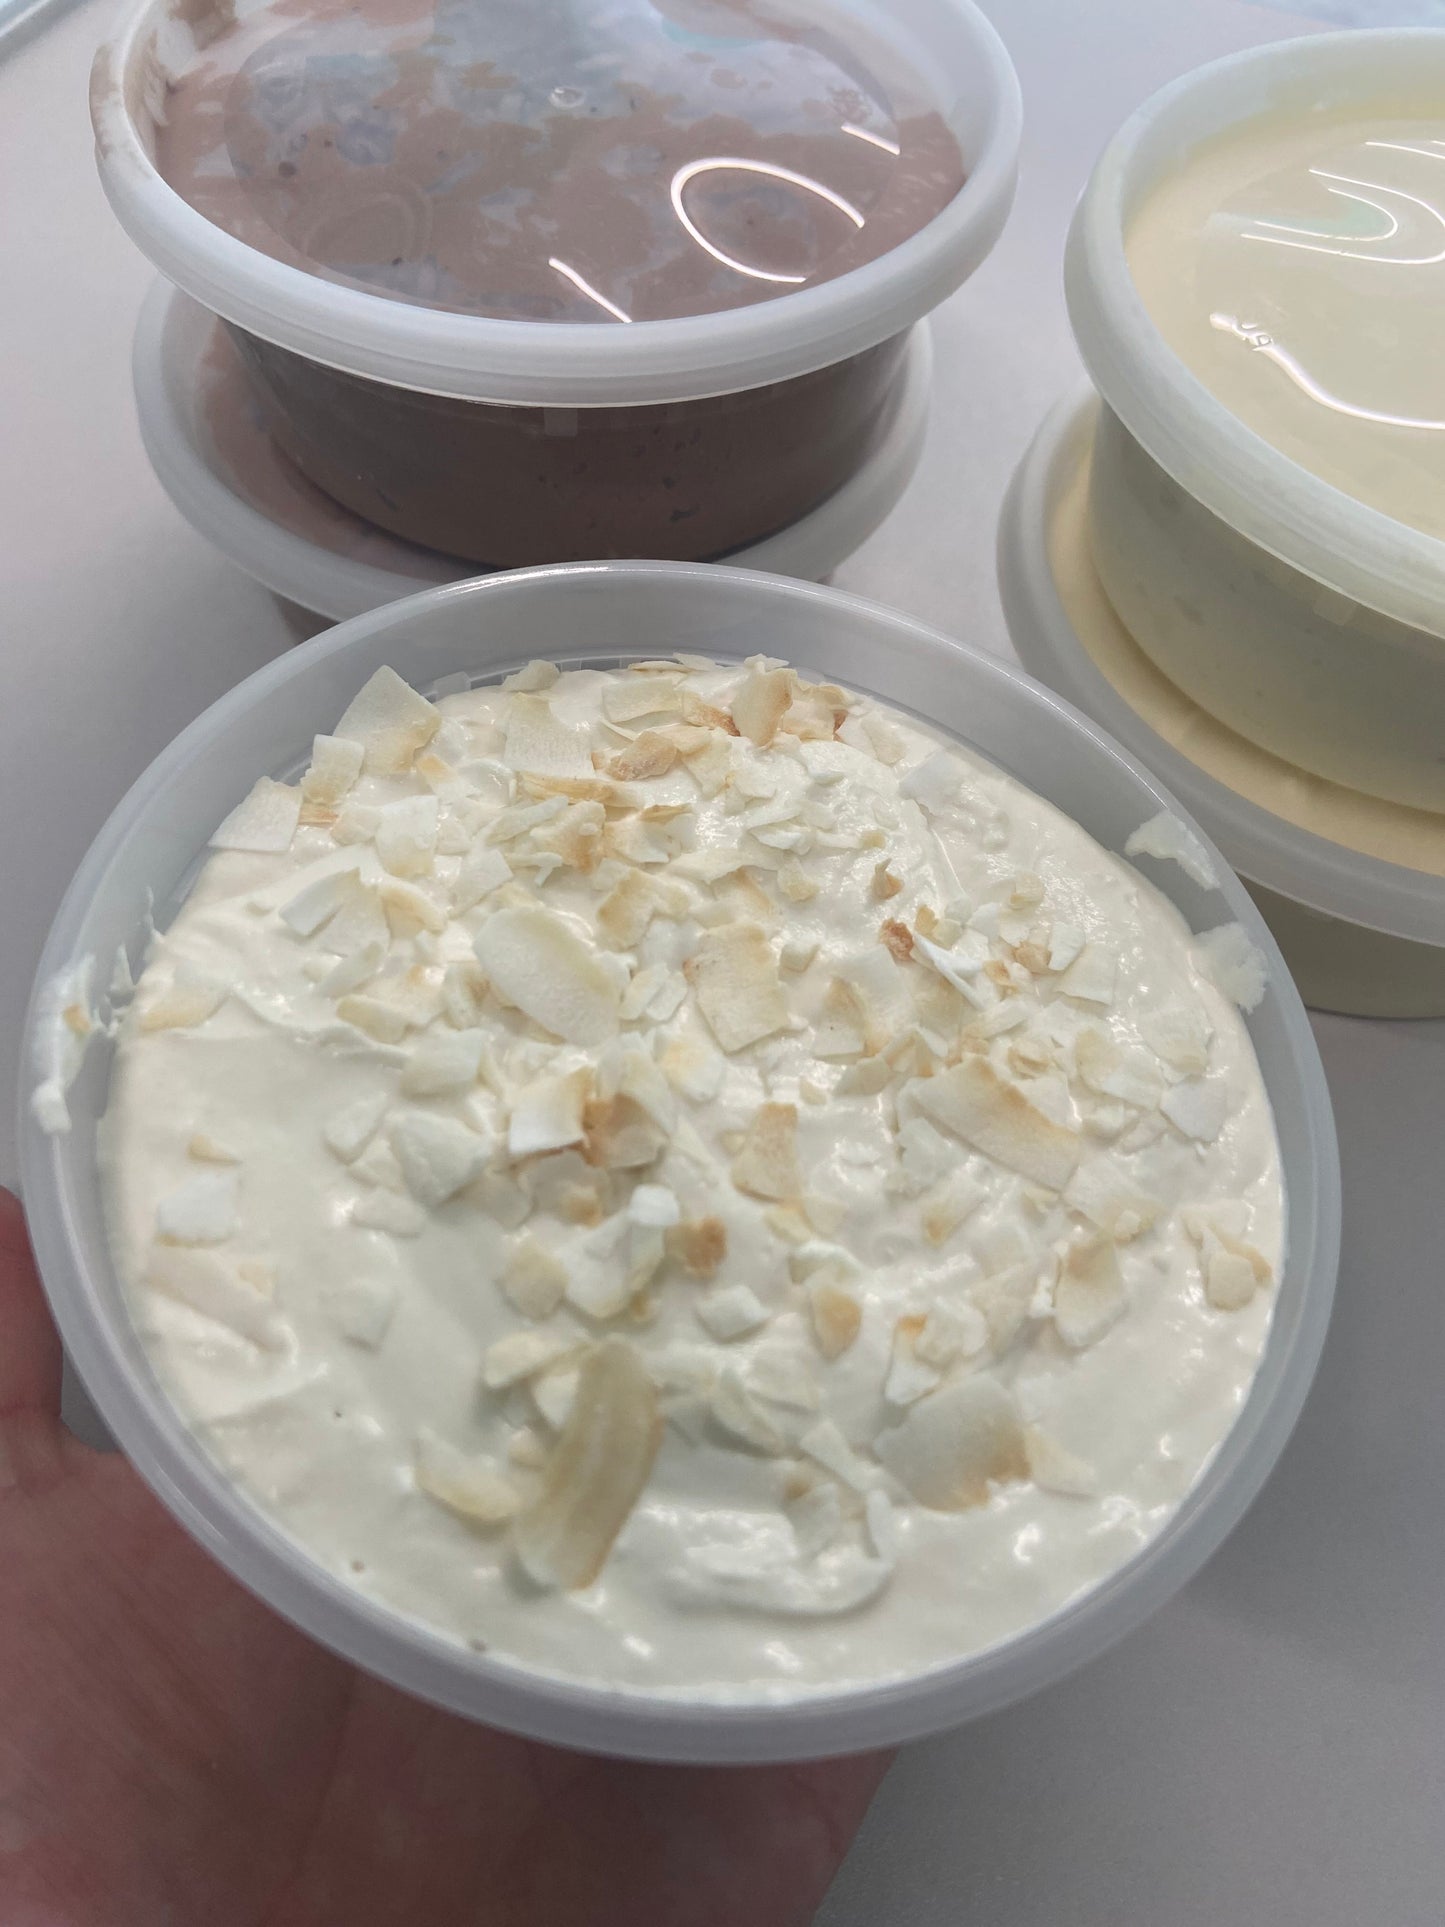 Cheesecake Mousse Fat Bomb, 0.5g carbs per serving